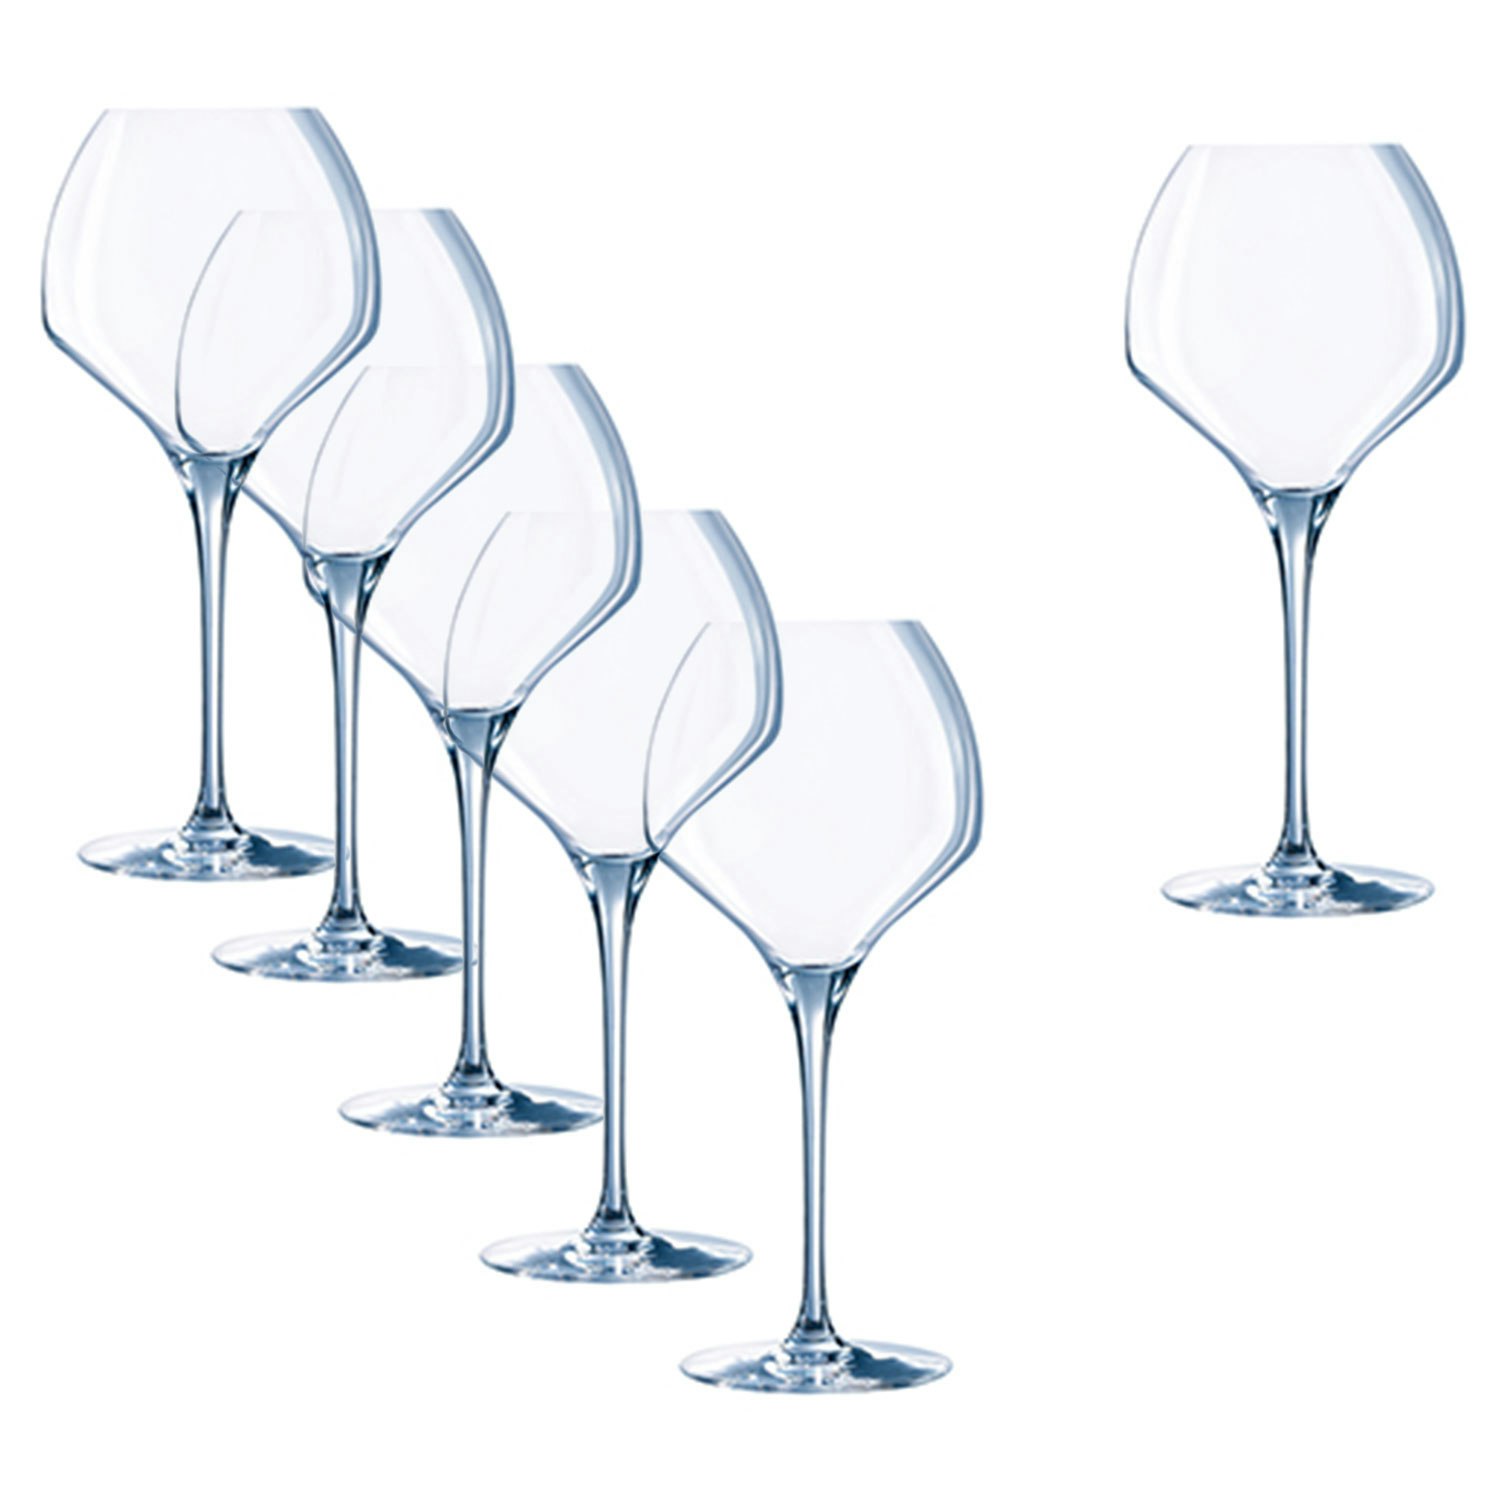 https://royaldesign.co.uk/image/6/chefsommelier-open-up-red-wine-glass-47-cl-6-pack-0